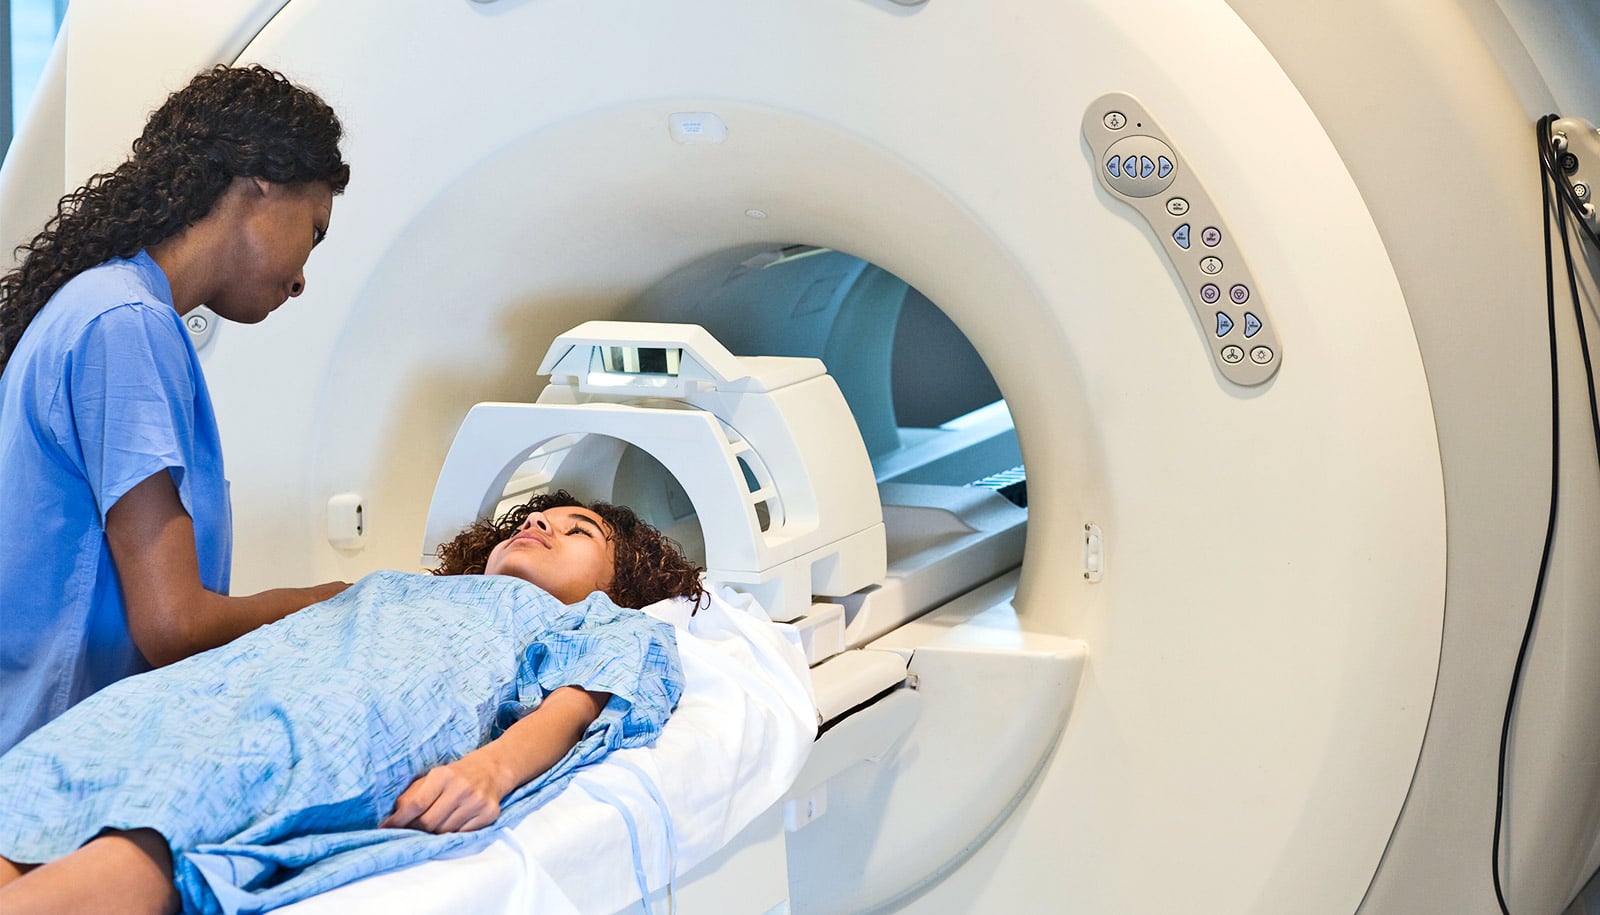 A health care worker helps a child waiting for an MRI scan.